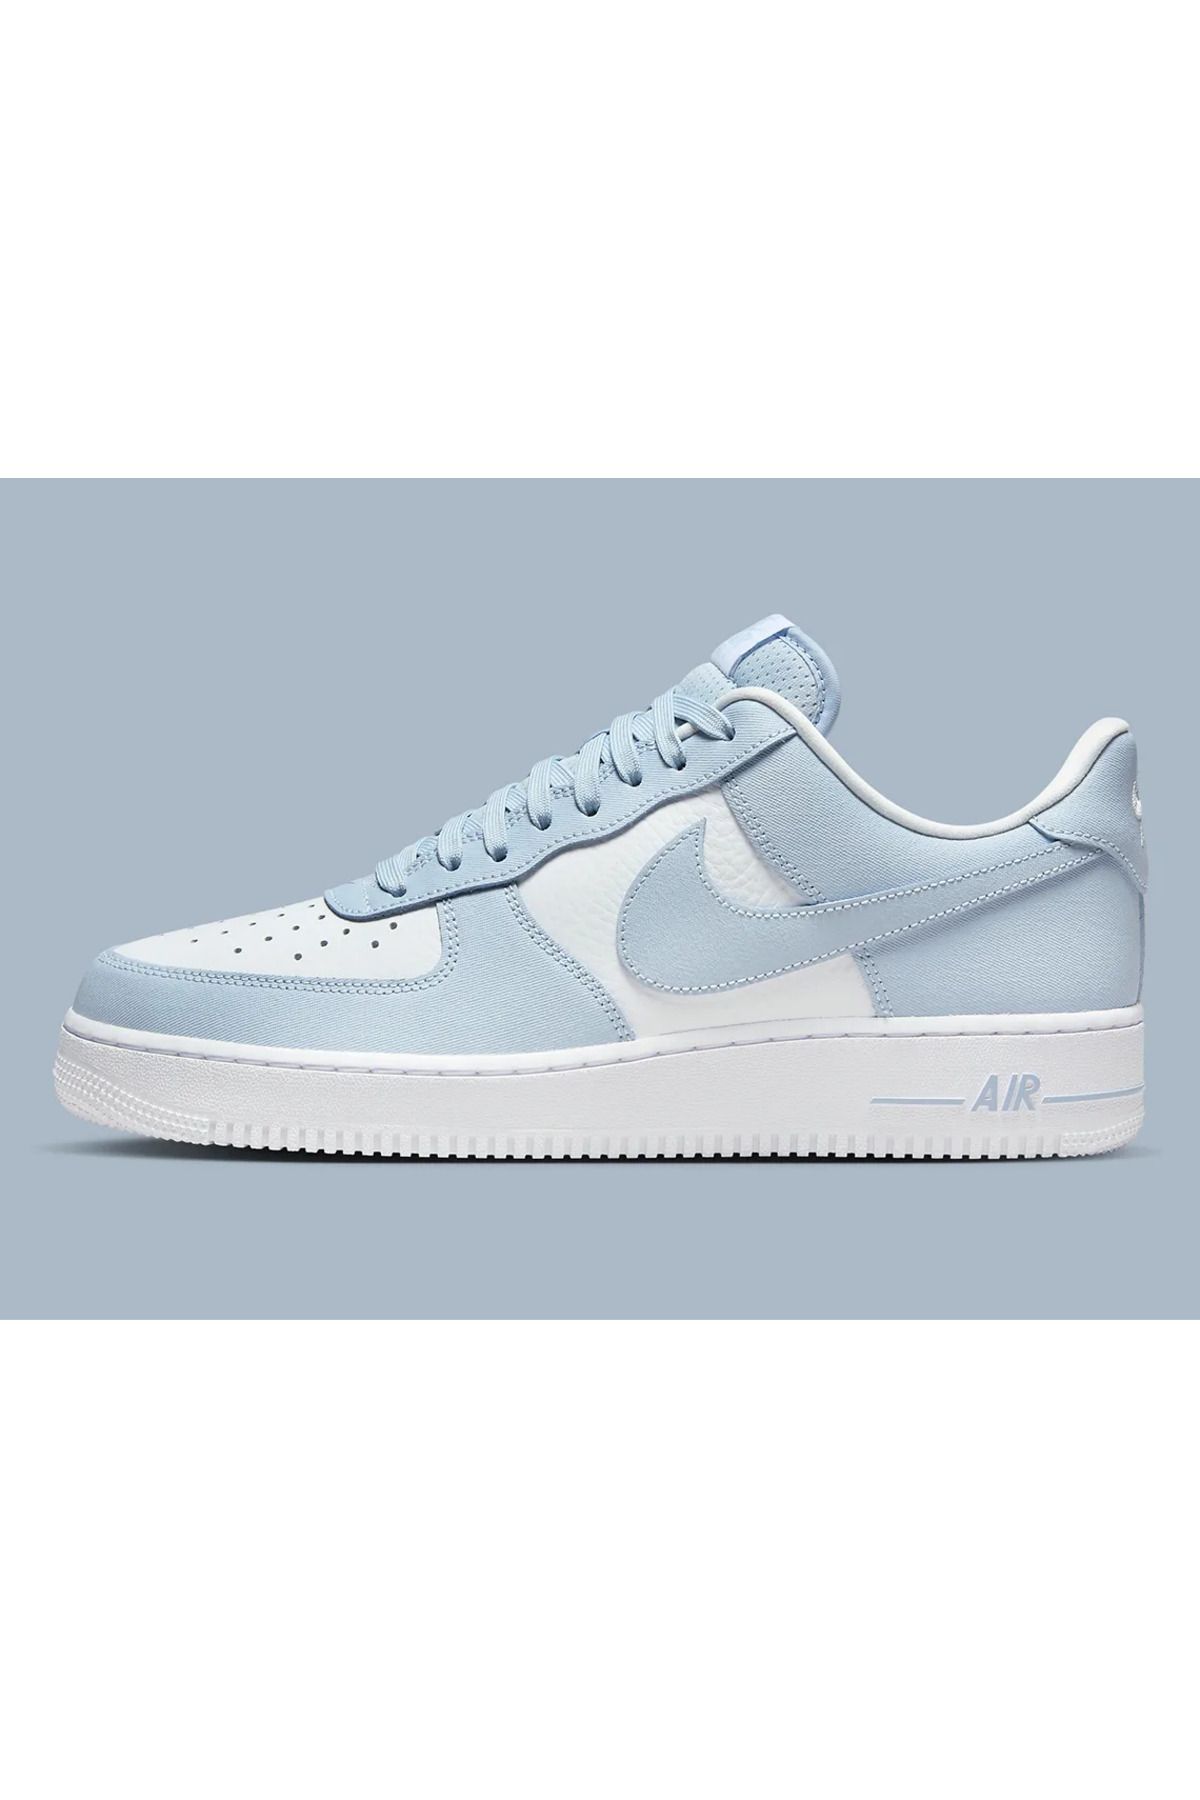 Nike Air Force 1 '07 Light Armory Blue Sneaker